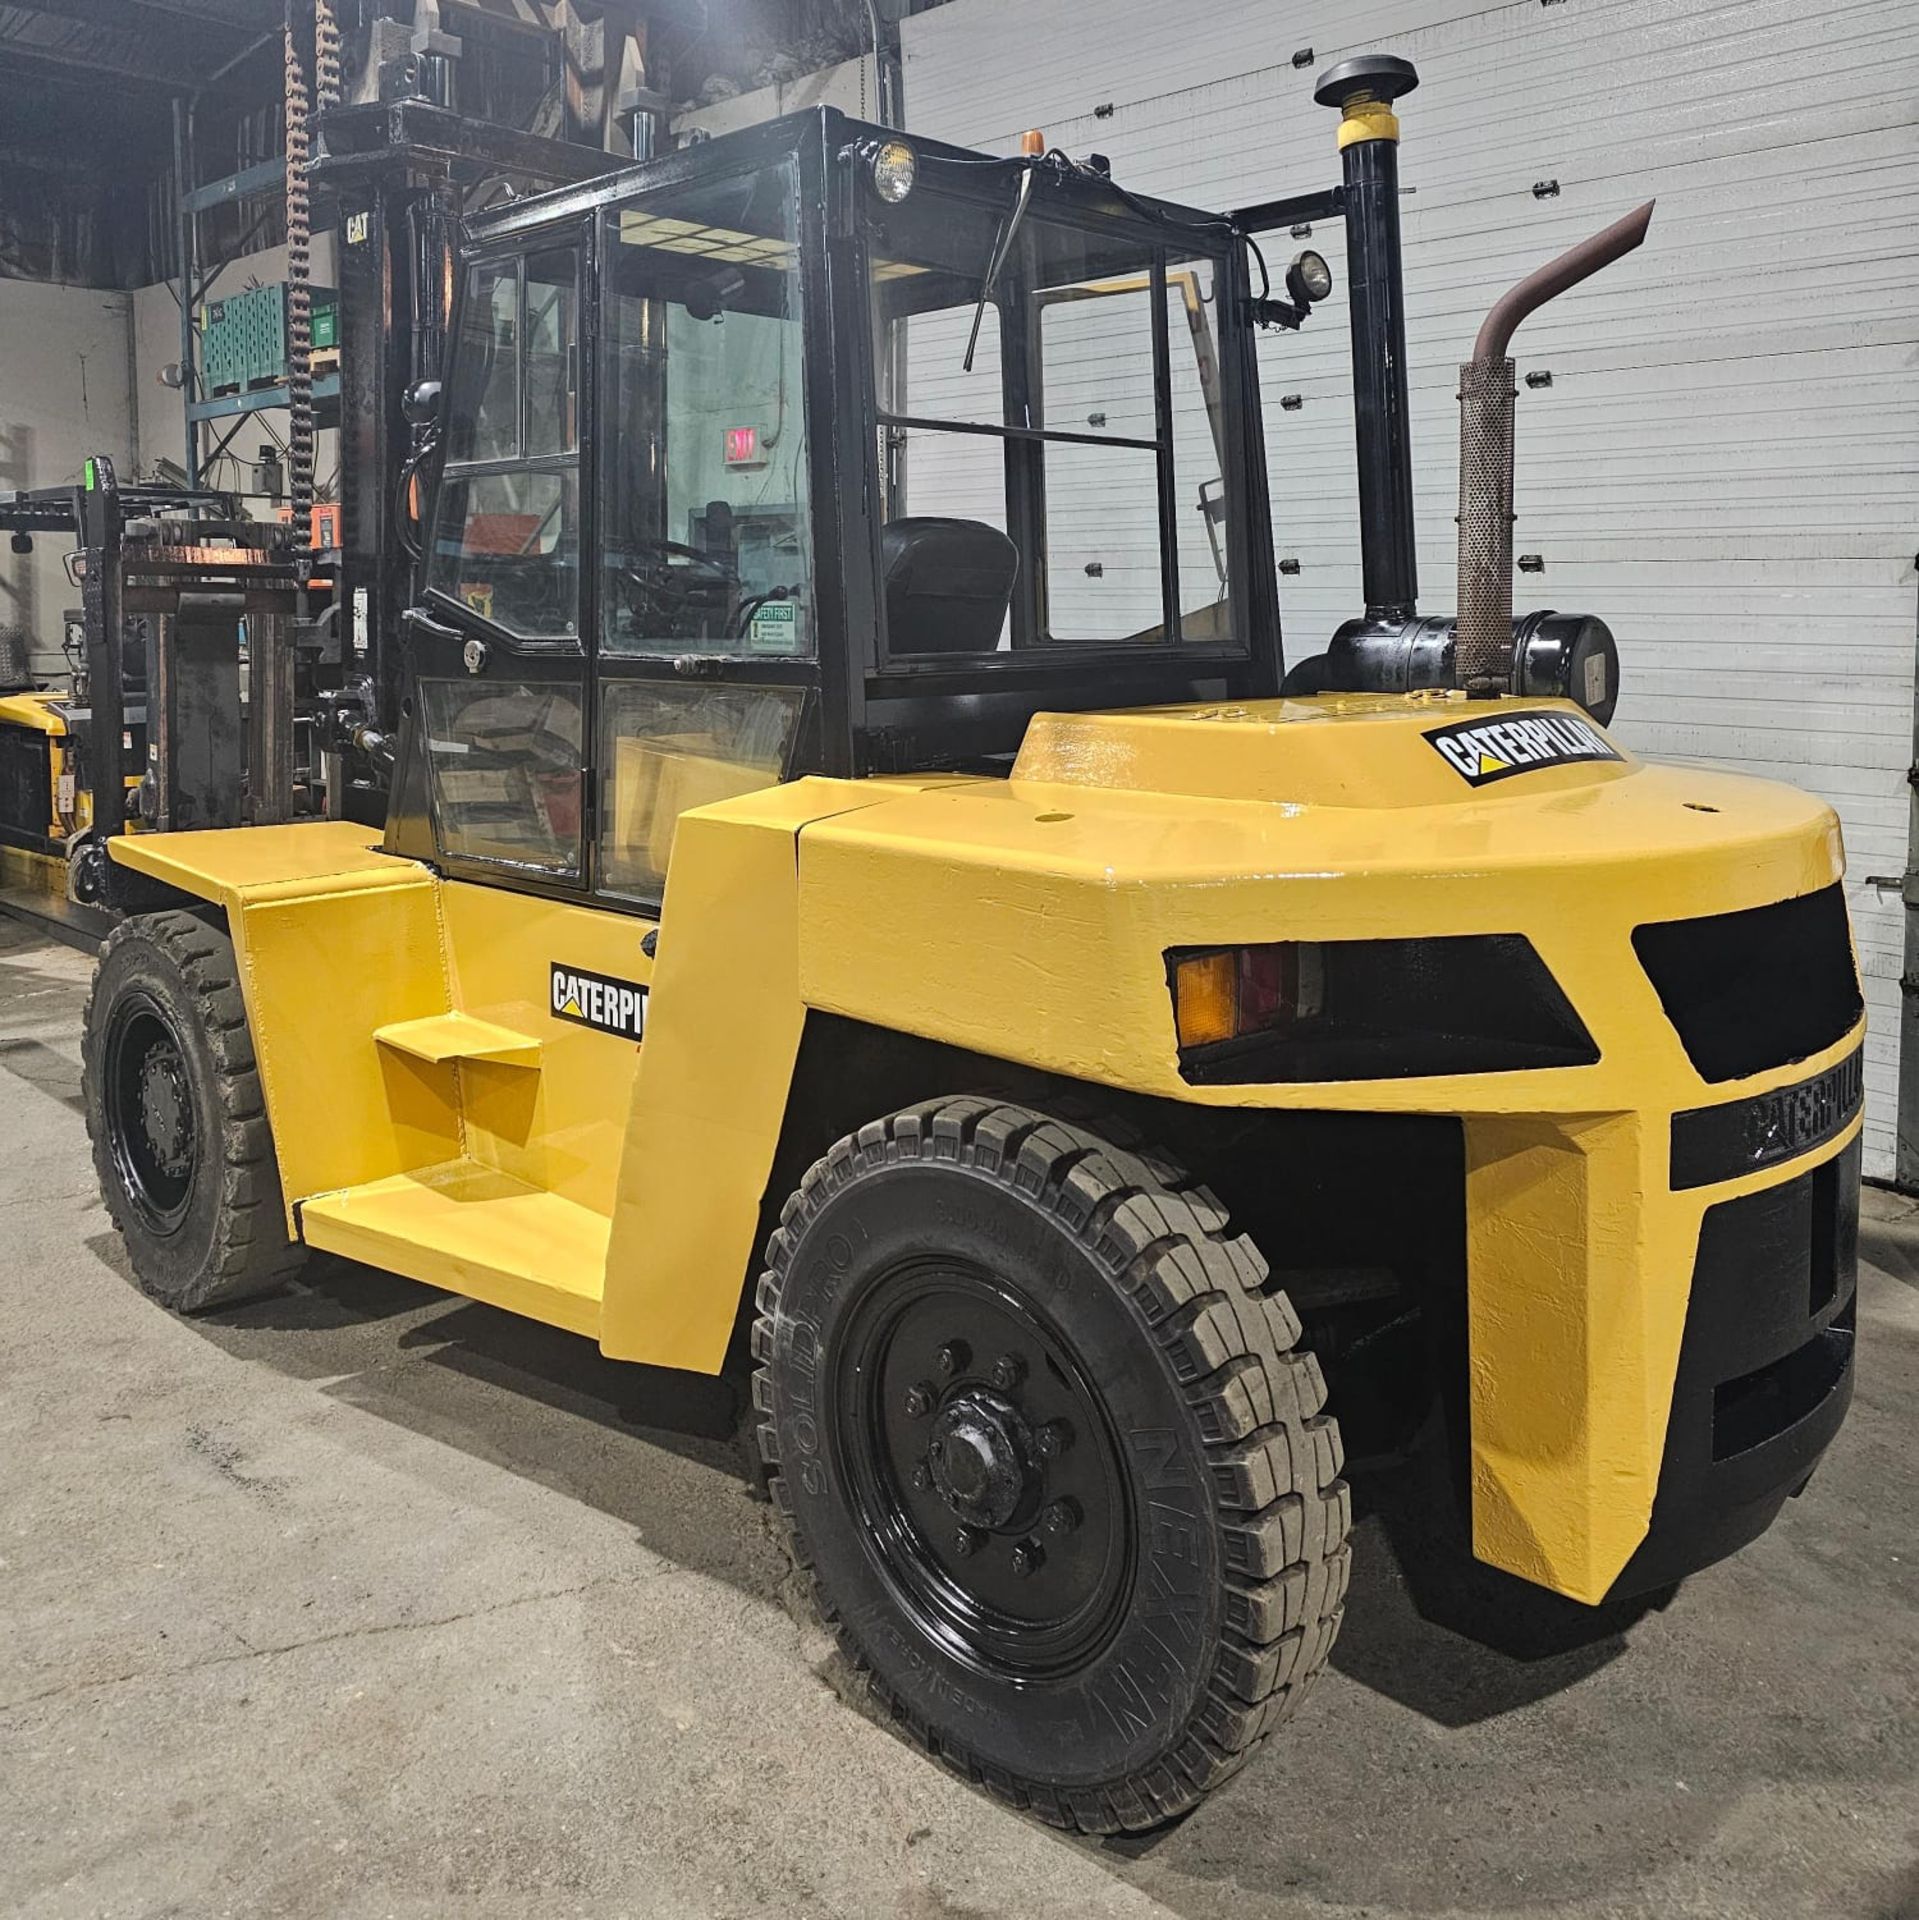 CATERPILLAR 20,000lbs Capacity LPG (Propane) OUTDOOR Forklift with 72" Forks & 146" load height with - Image 6 of 9